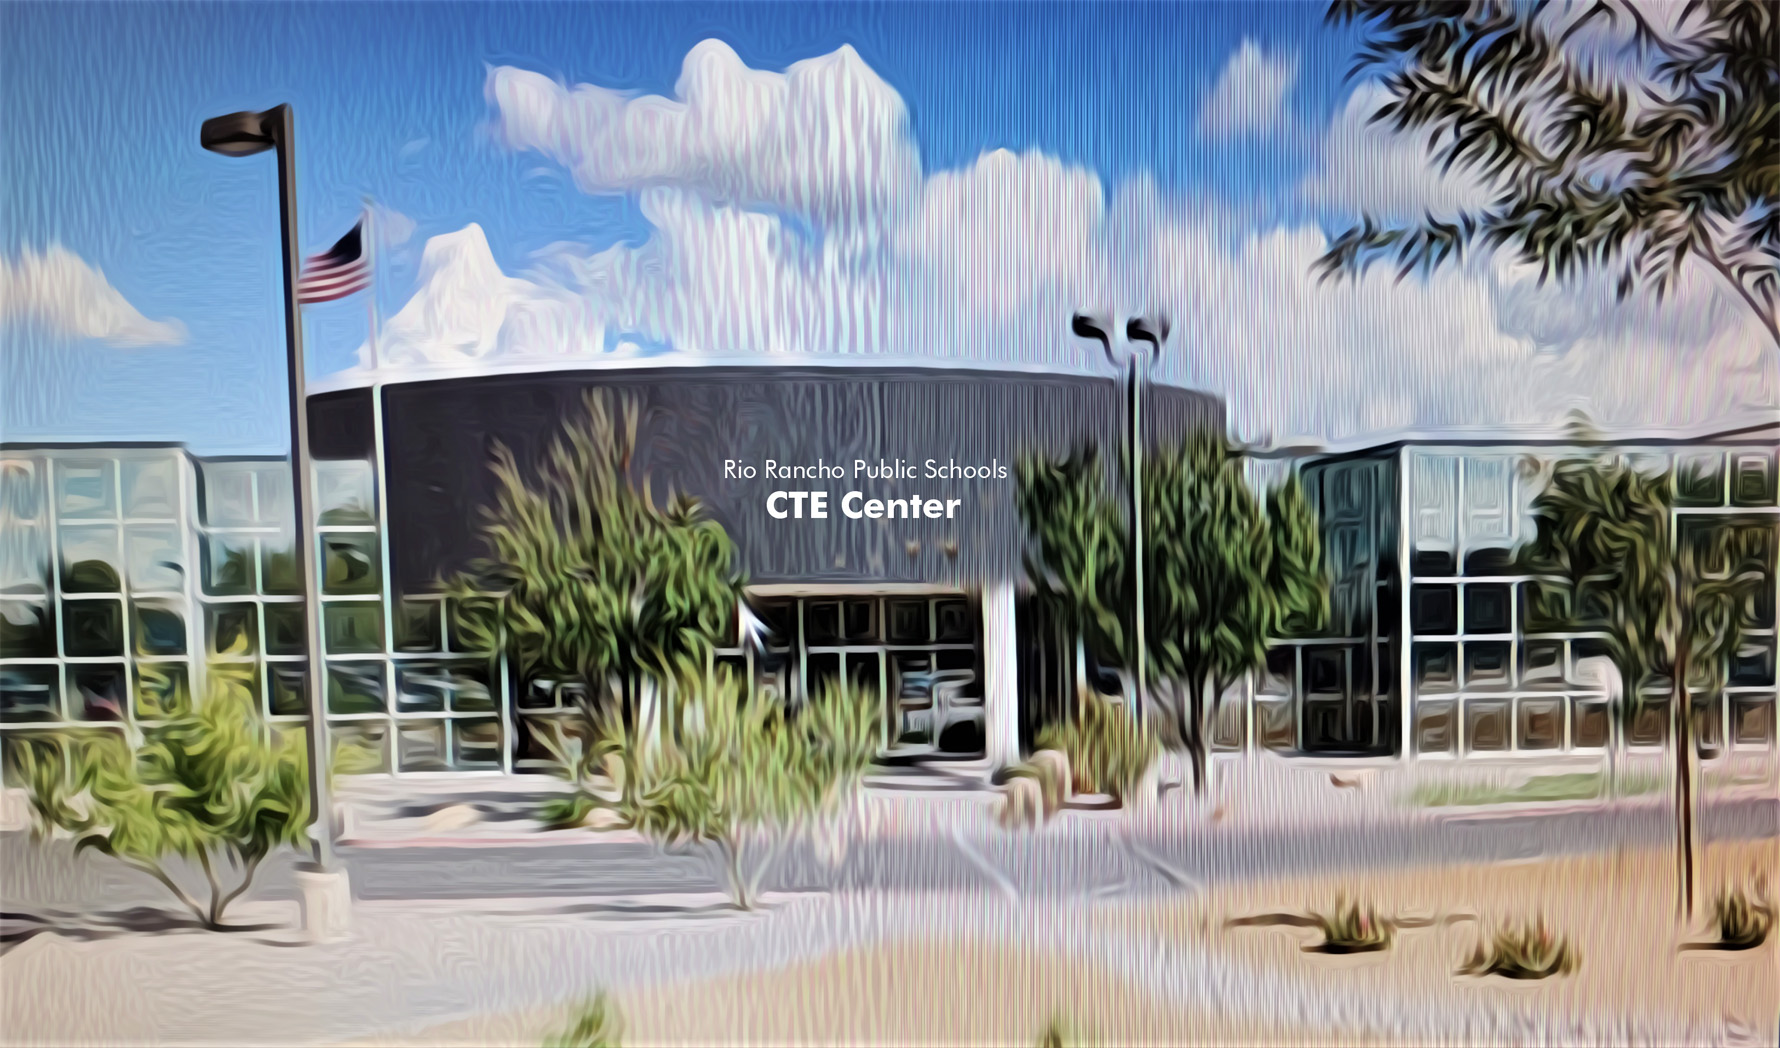 A rendering of what the new CTE Center could look like once completed and open to students in Fall 2023.